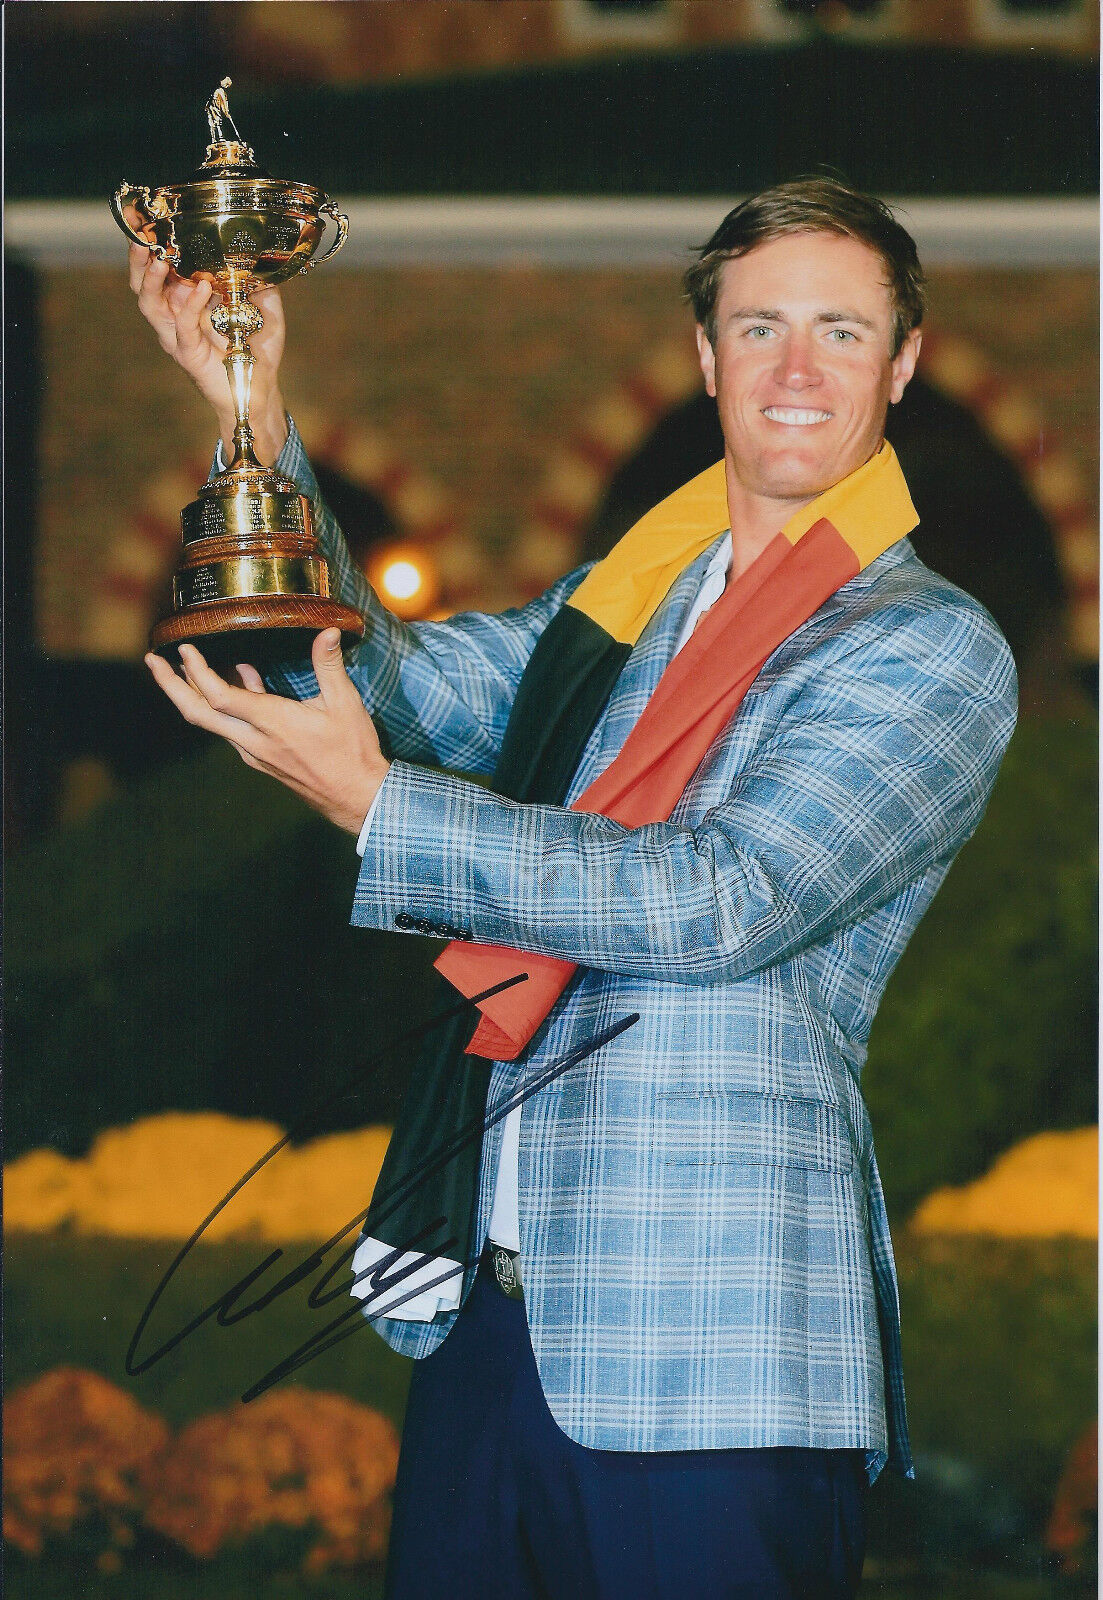 Nicolas COLSAERTS SIGNED Autograph 12x8 Photo Poster painting AFTAL COA with Ryder Cup MEDINAH